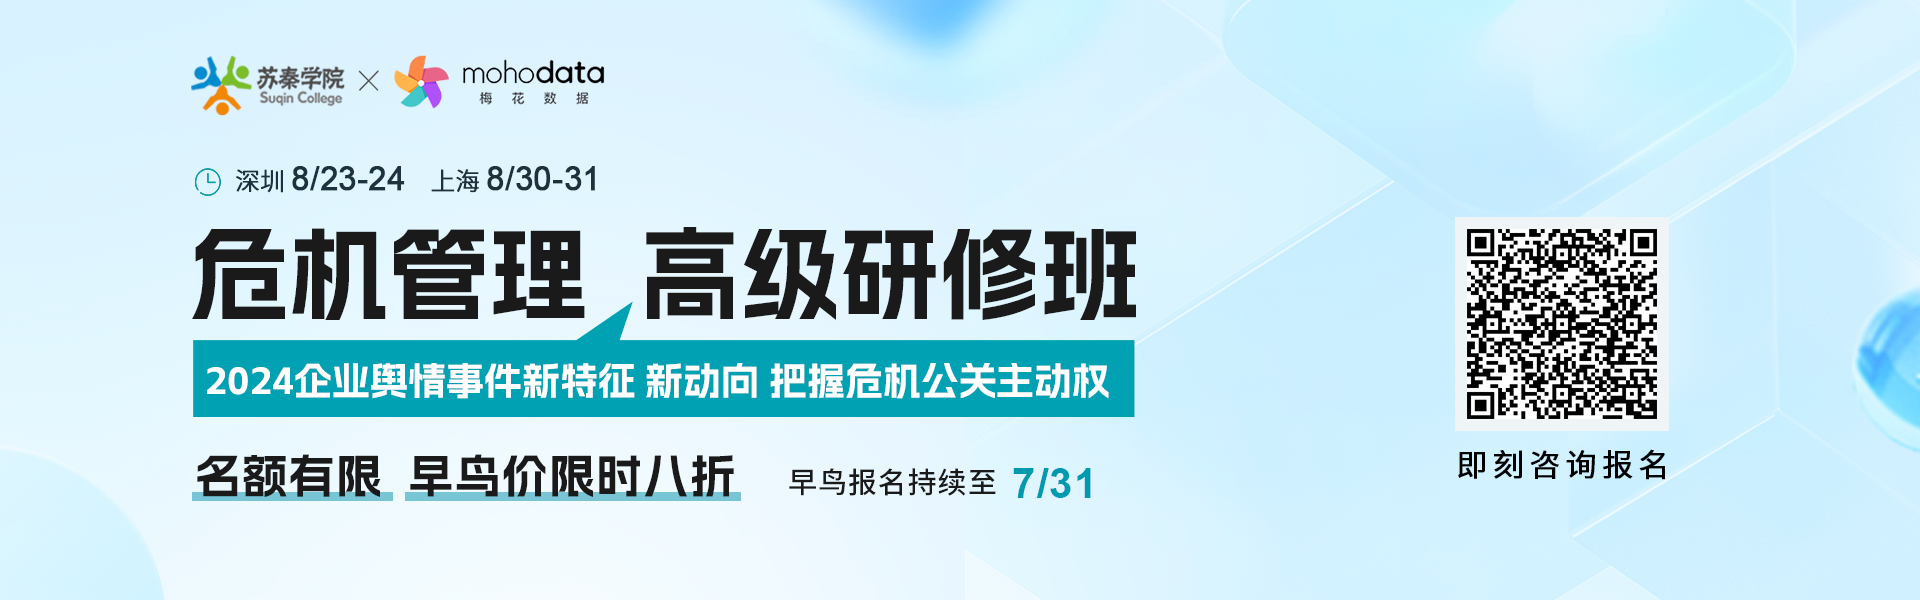 mohodata官网首页轮播banner1